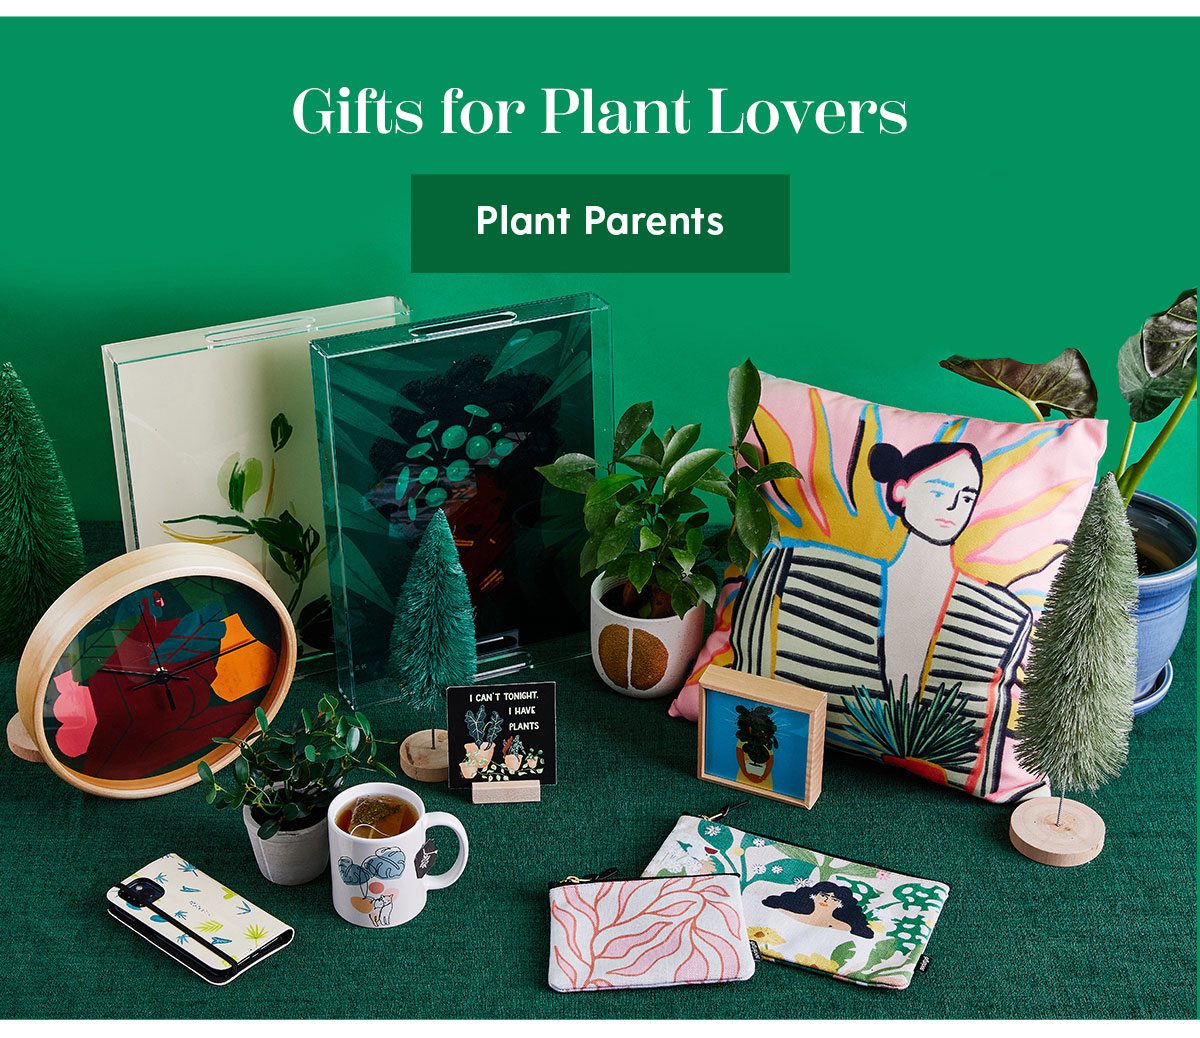 Gifts for Plant Lovers | Plant Parents